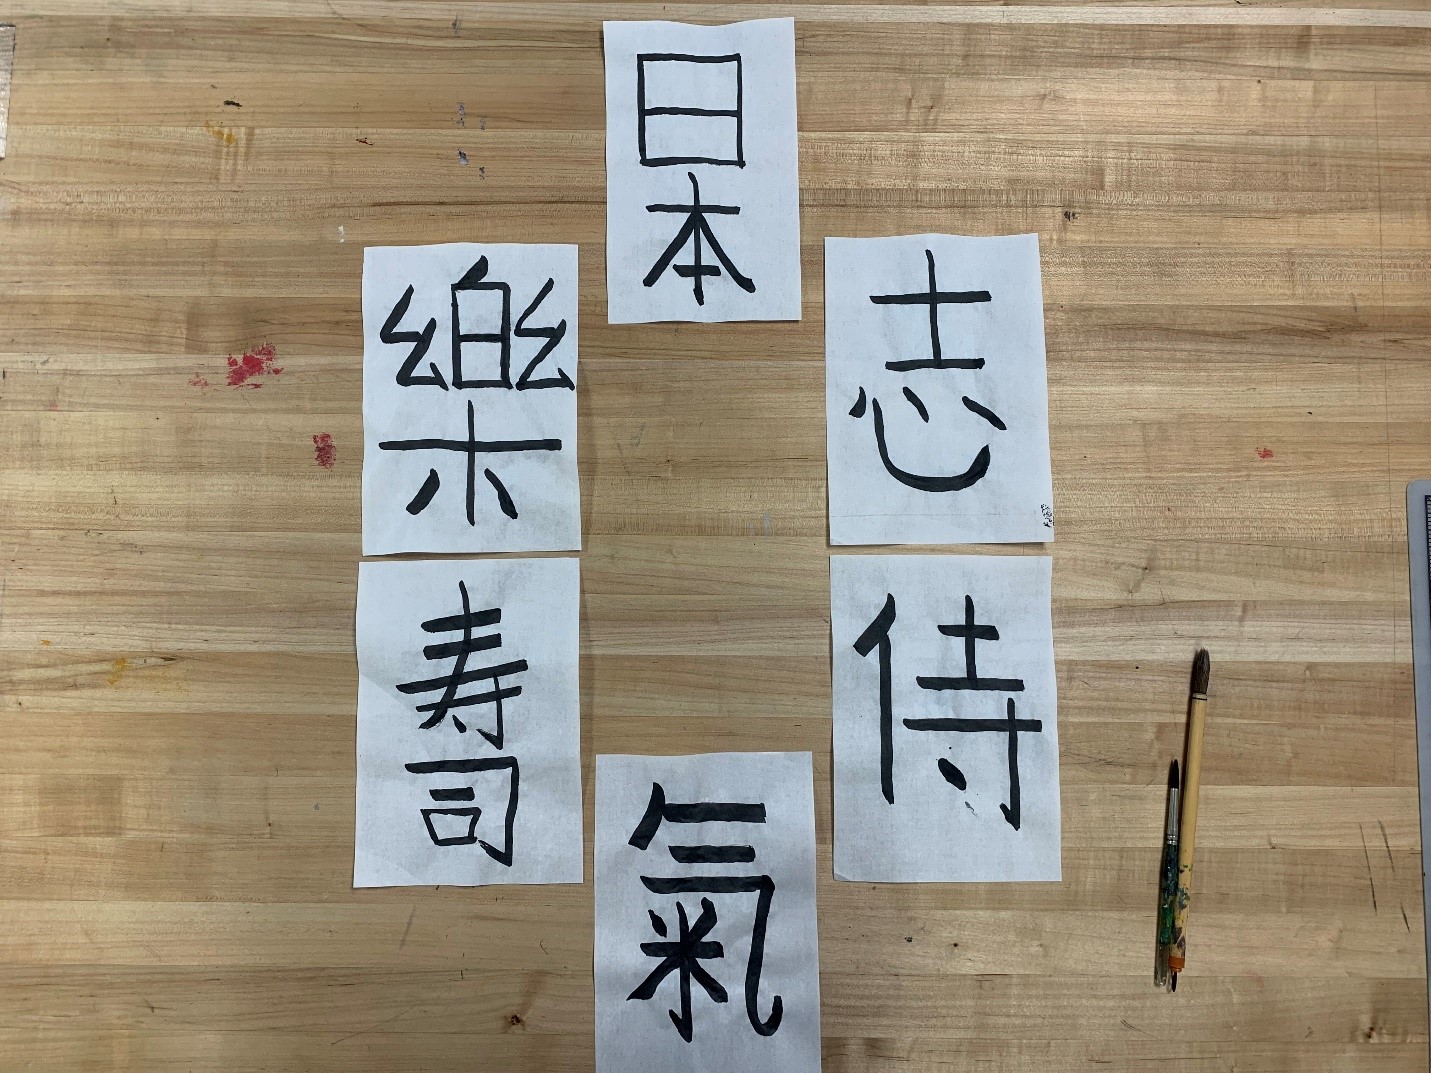 Six sheets of paper with completed Japanese calligraphy letters.